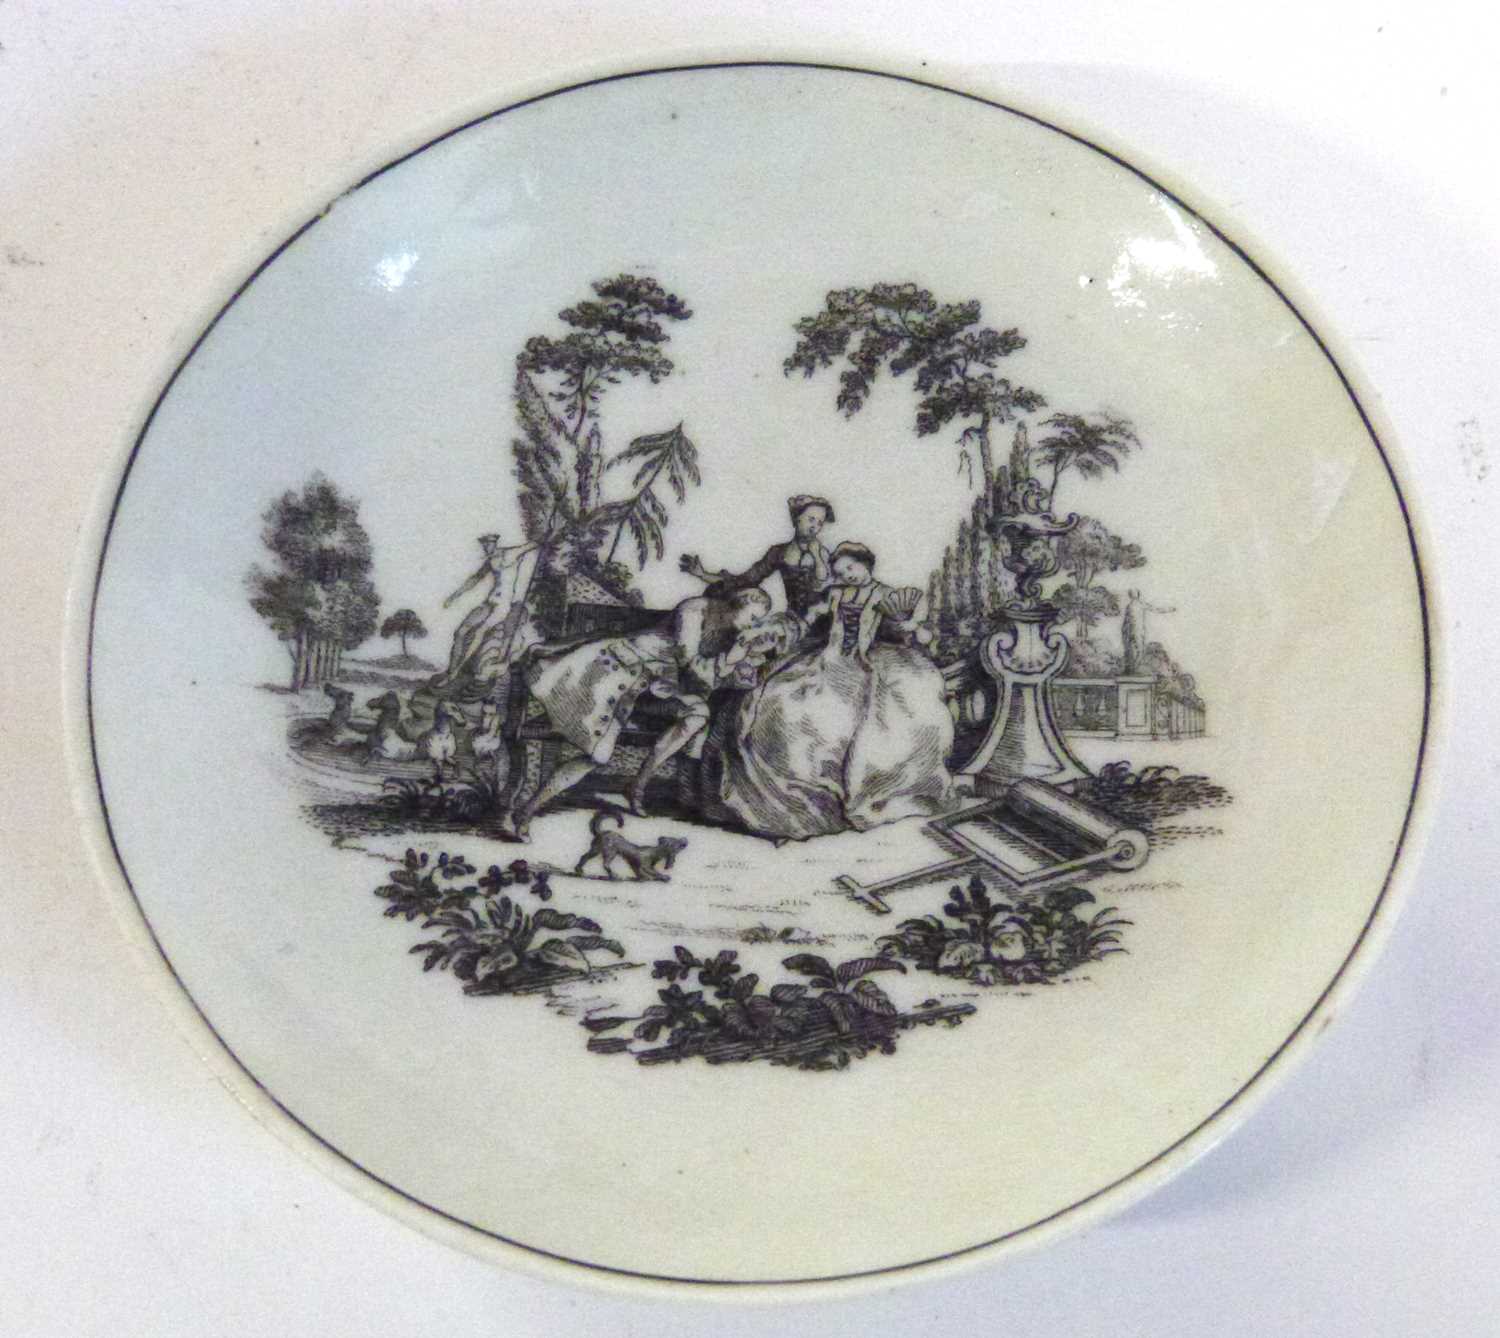 A Worcester tea bowl and saucer with matching cup, all printed with the L'amore print - Image 2 of 6